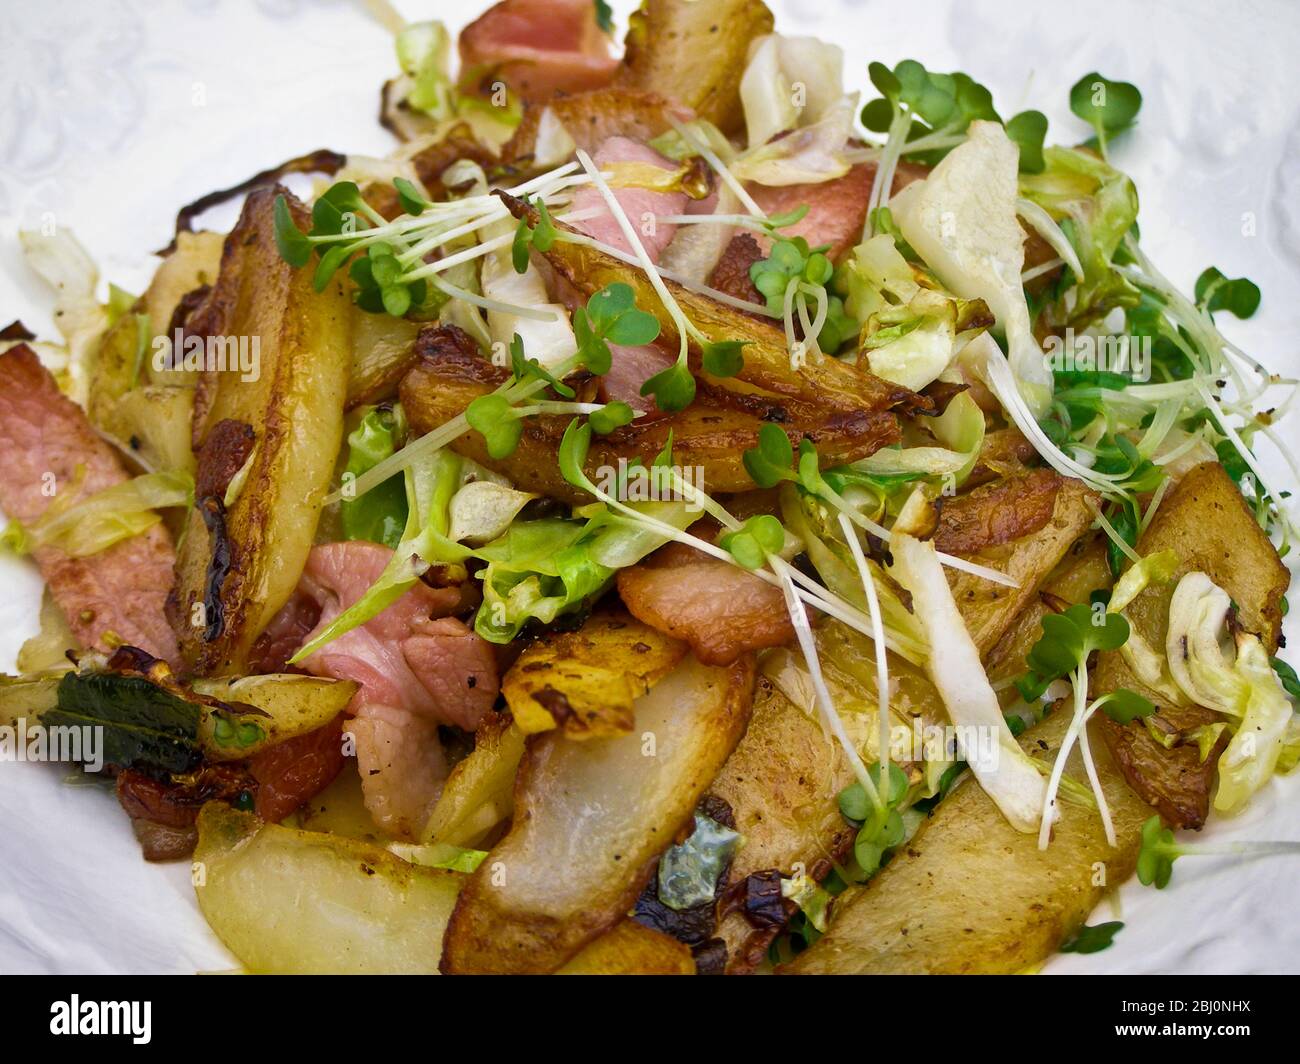 Lunch salad of bacon pieces, croutons, fried potatoes with freshly cut cress sprouts - Stock Photo